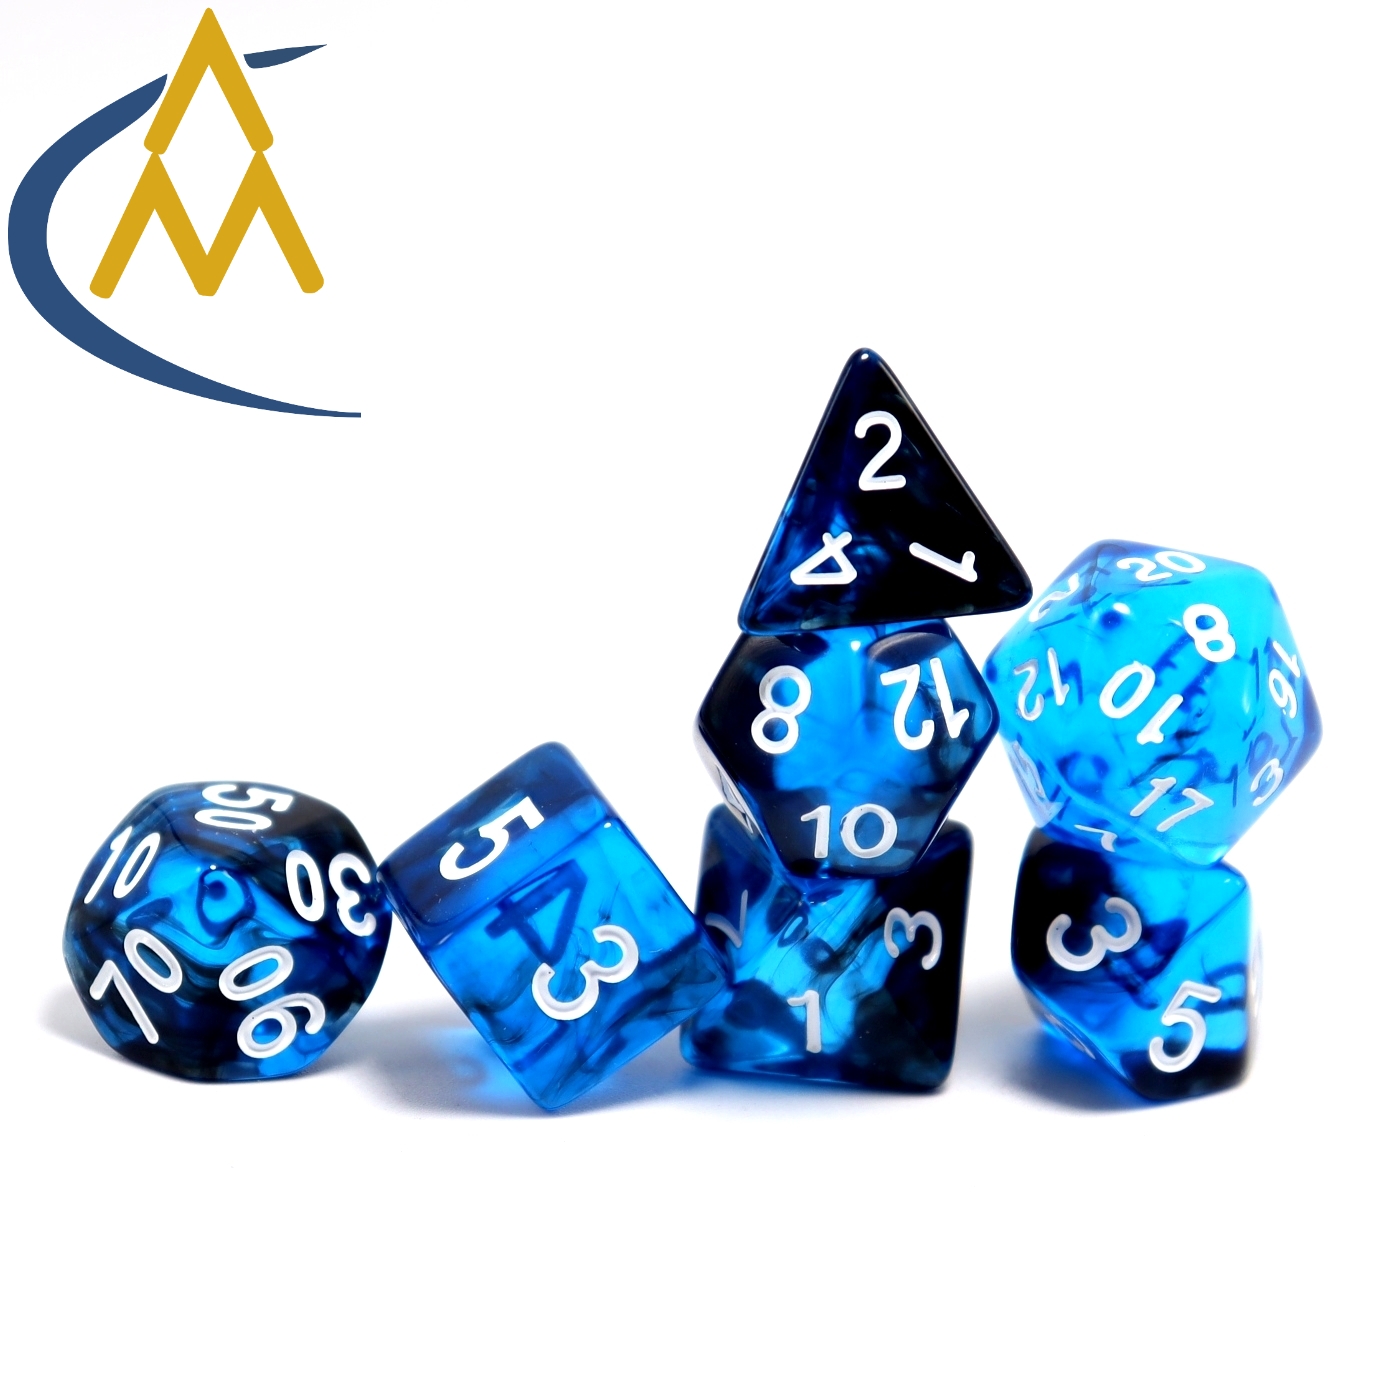 New acrylic dice round corner dice two-color transparent dungeons and dragons